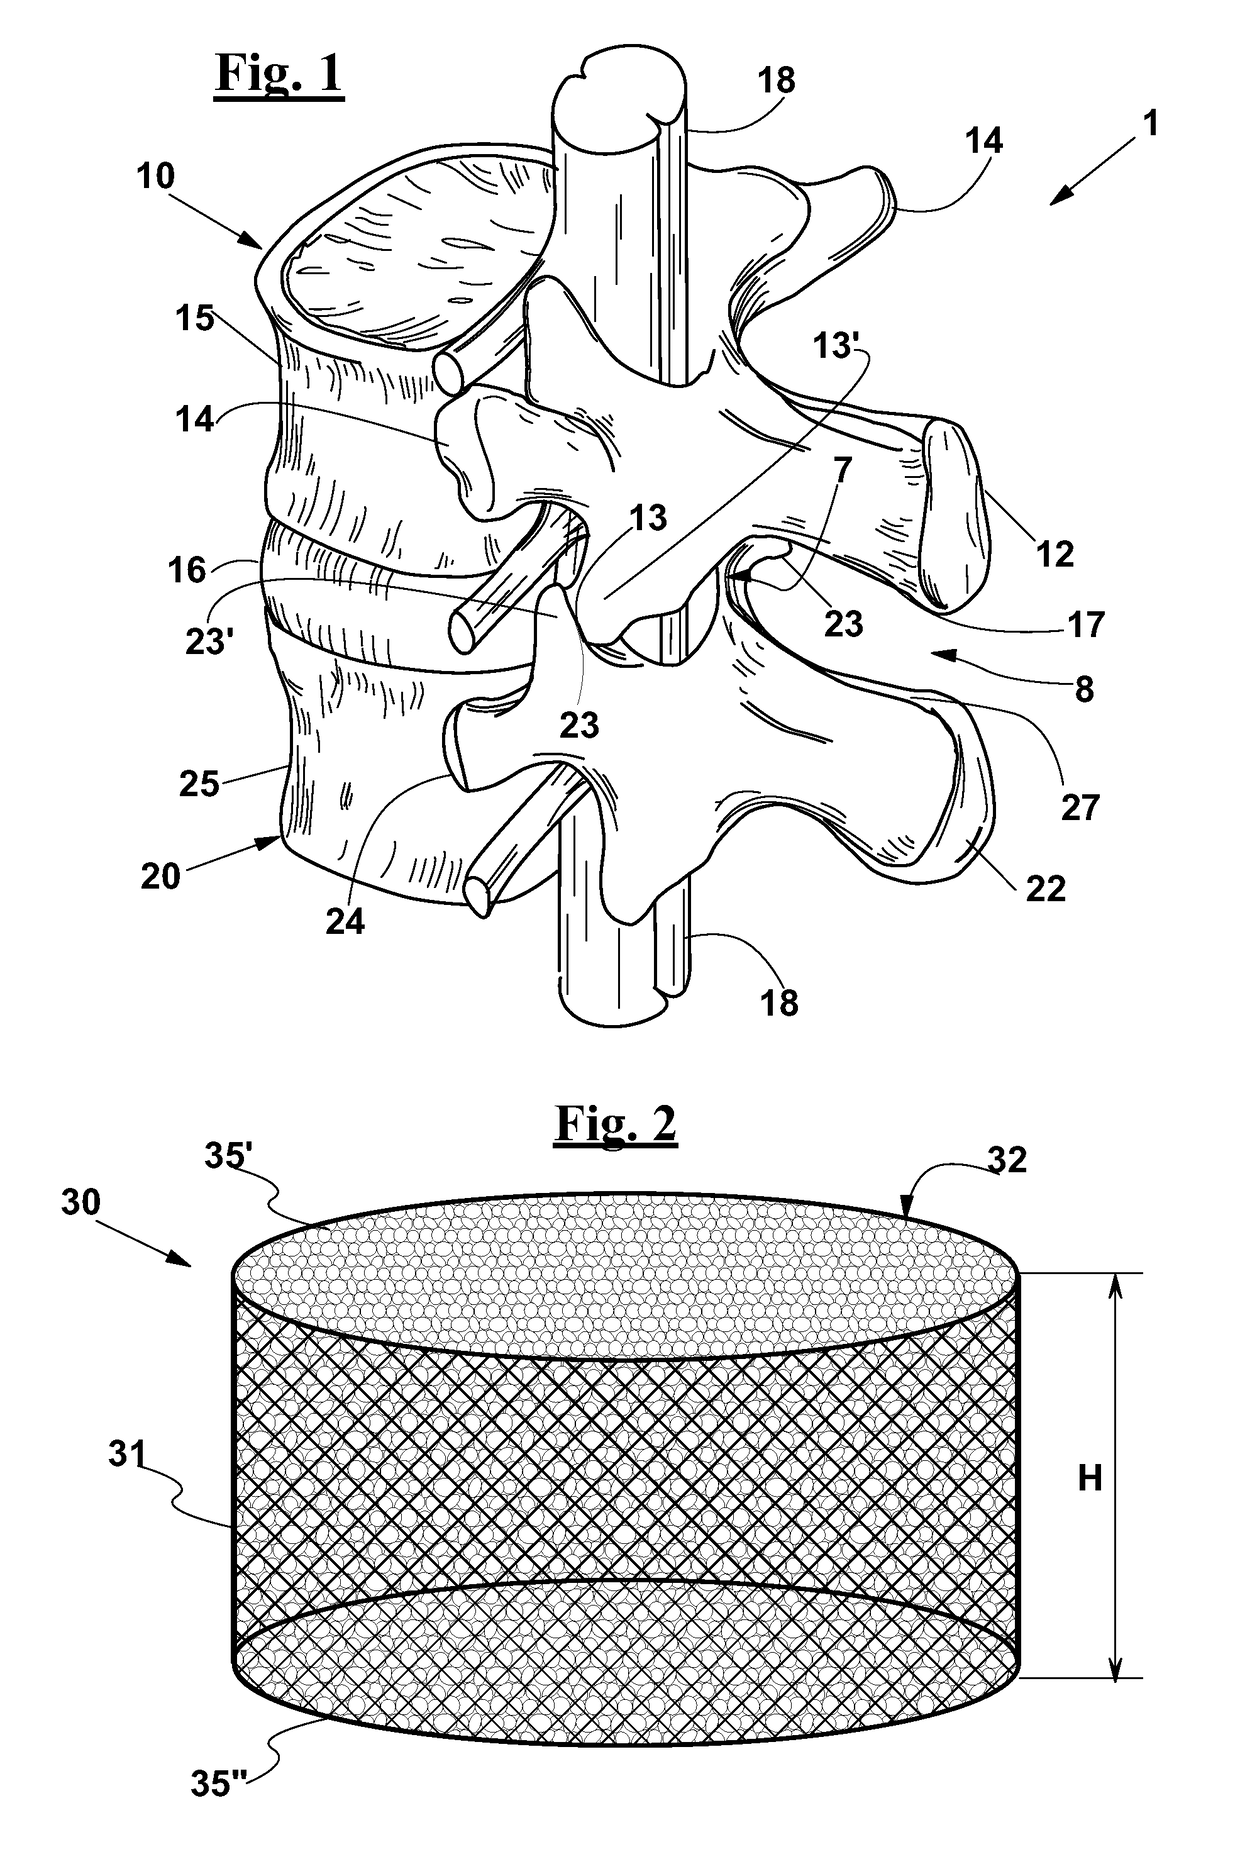 Vertebral fusion device and system